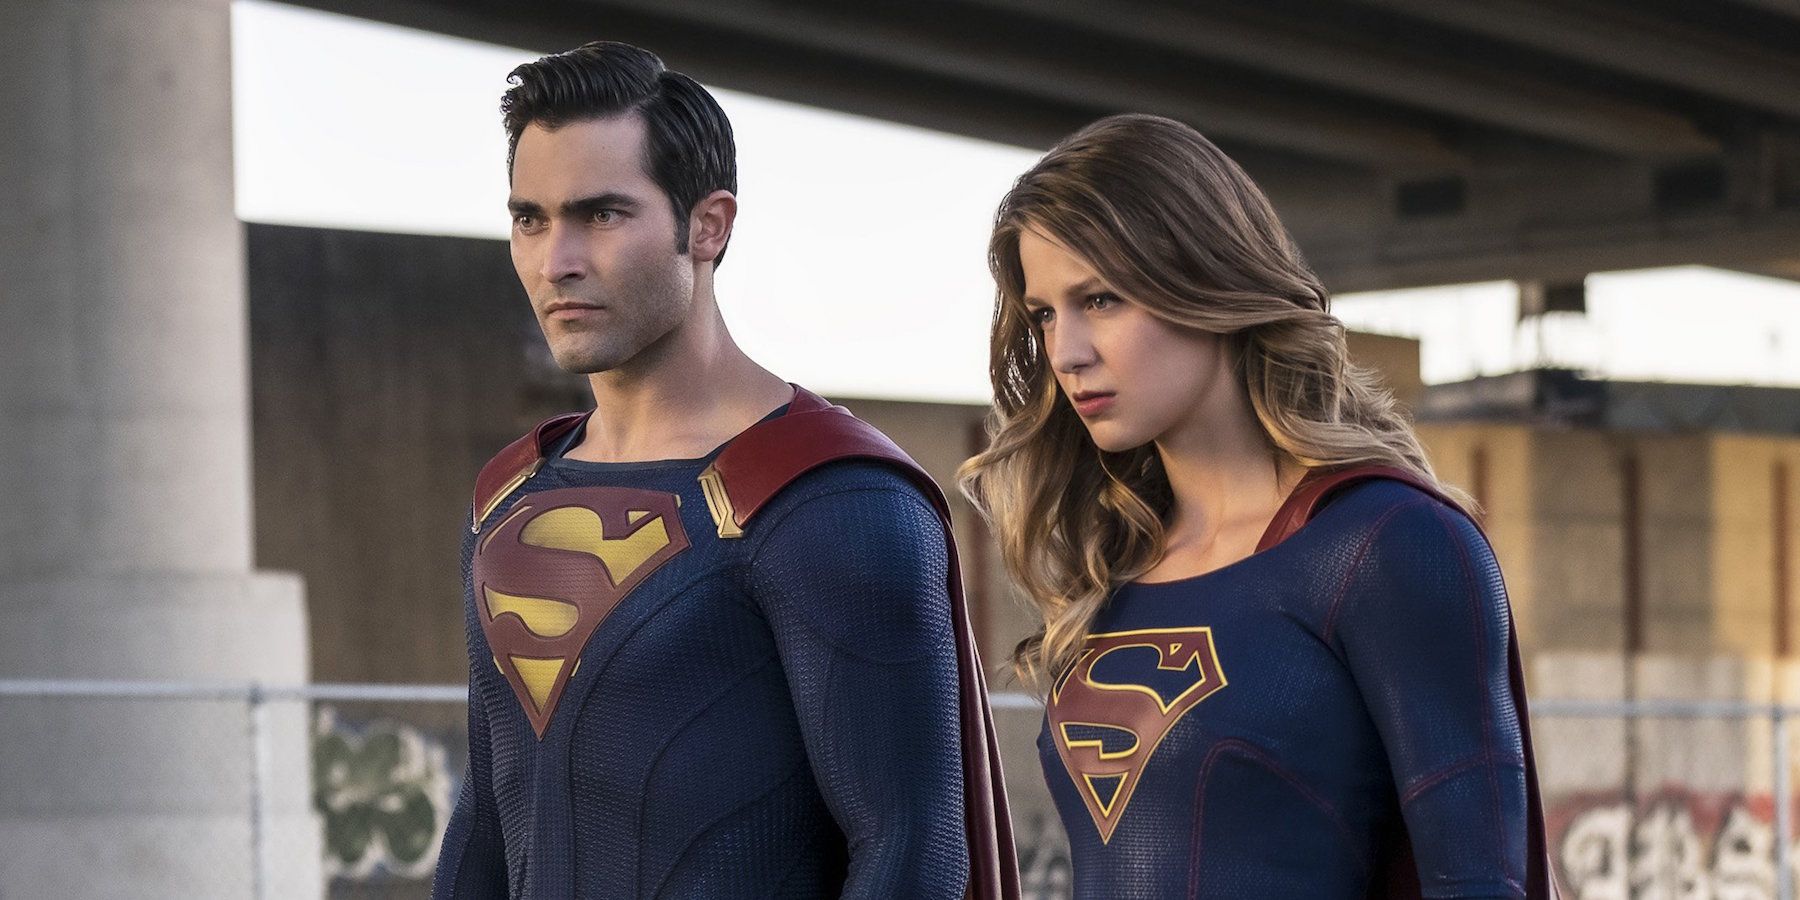 Could Supergirl’s Superman Get His Own Show?